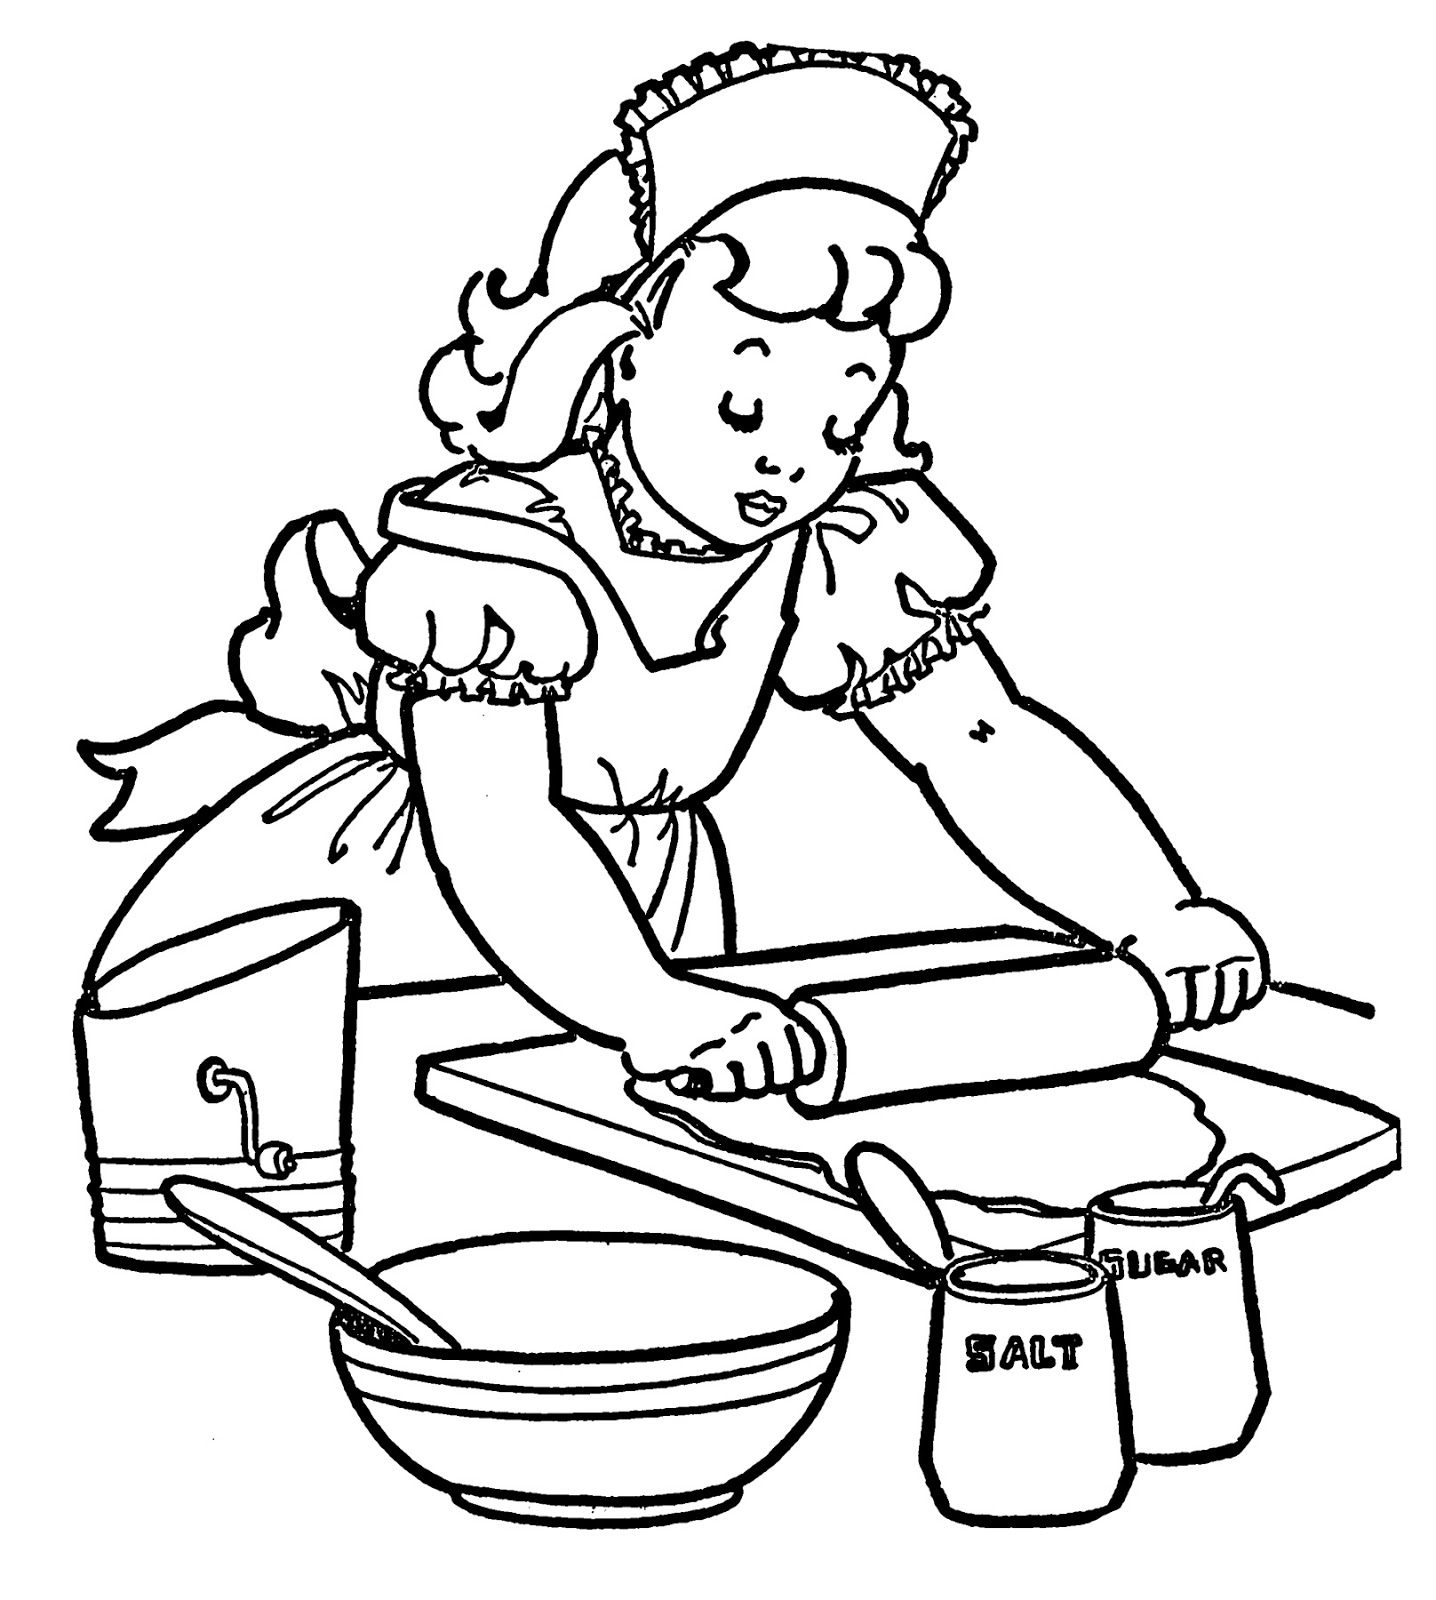 Baking Apple Pie Coloring Page